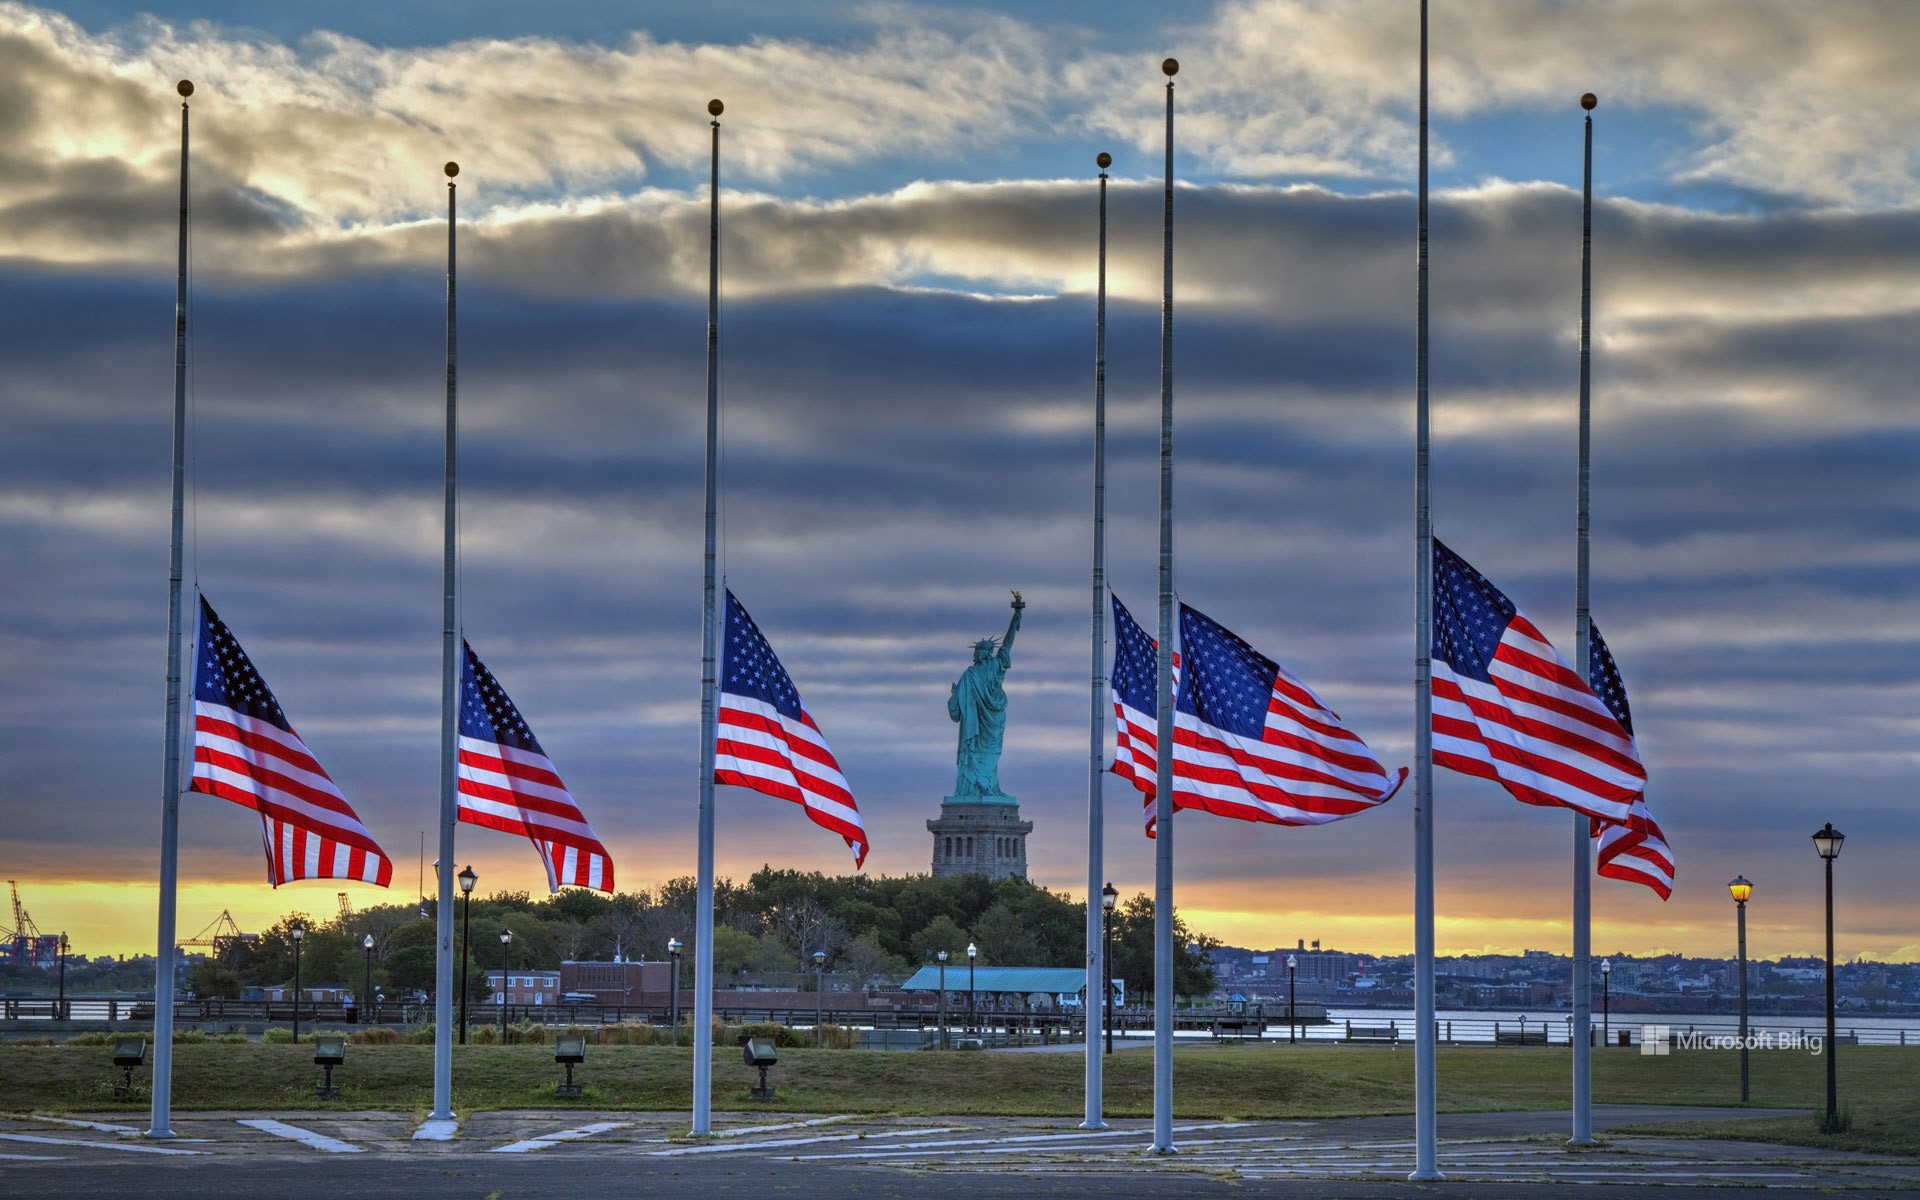 Statue of Liberty seen behind US flags at half-staff for the anniversary of September 11 in 2014, New York City